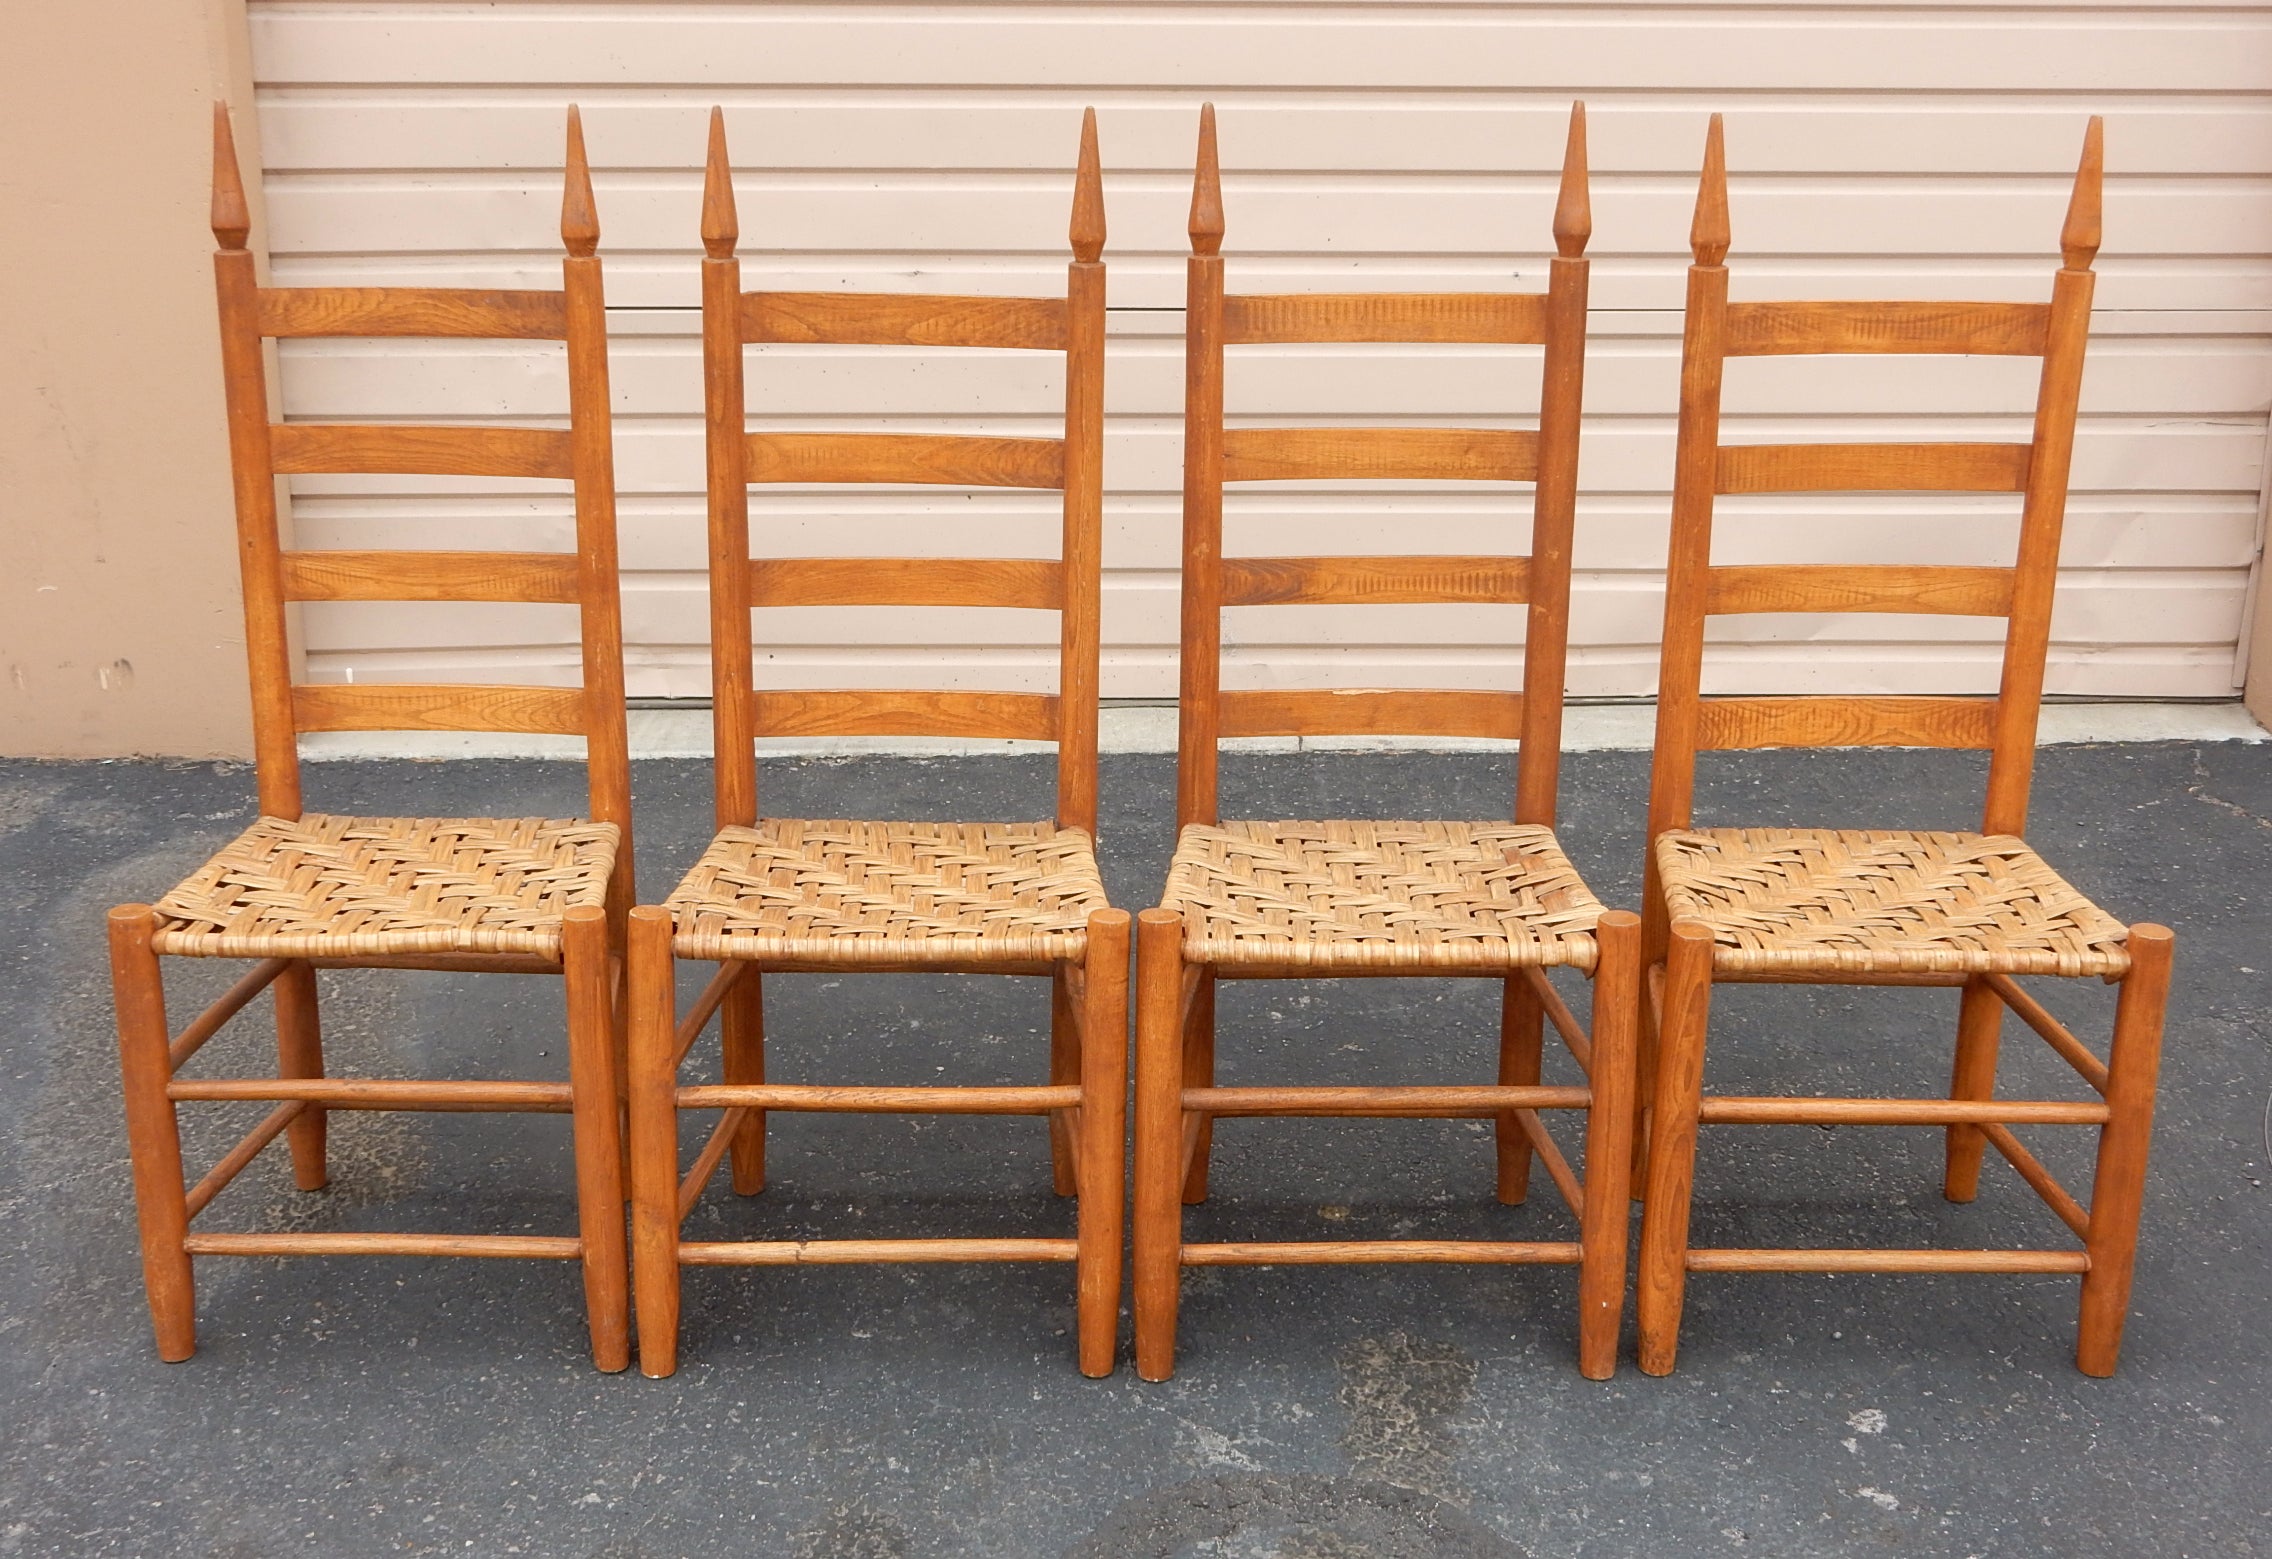 Set of 4 solid Oak ladderback Shaker era style chairs.
We believe these to be early 1900s version. 
Woven rush seating have nice warm aged patina but no signs of use.
These are all solid and well made chairs.